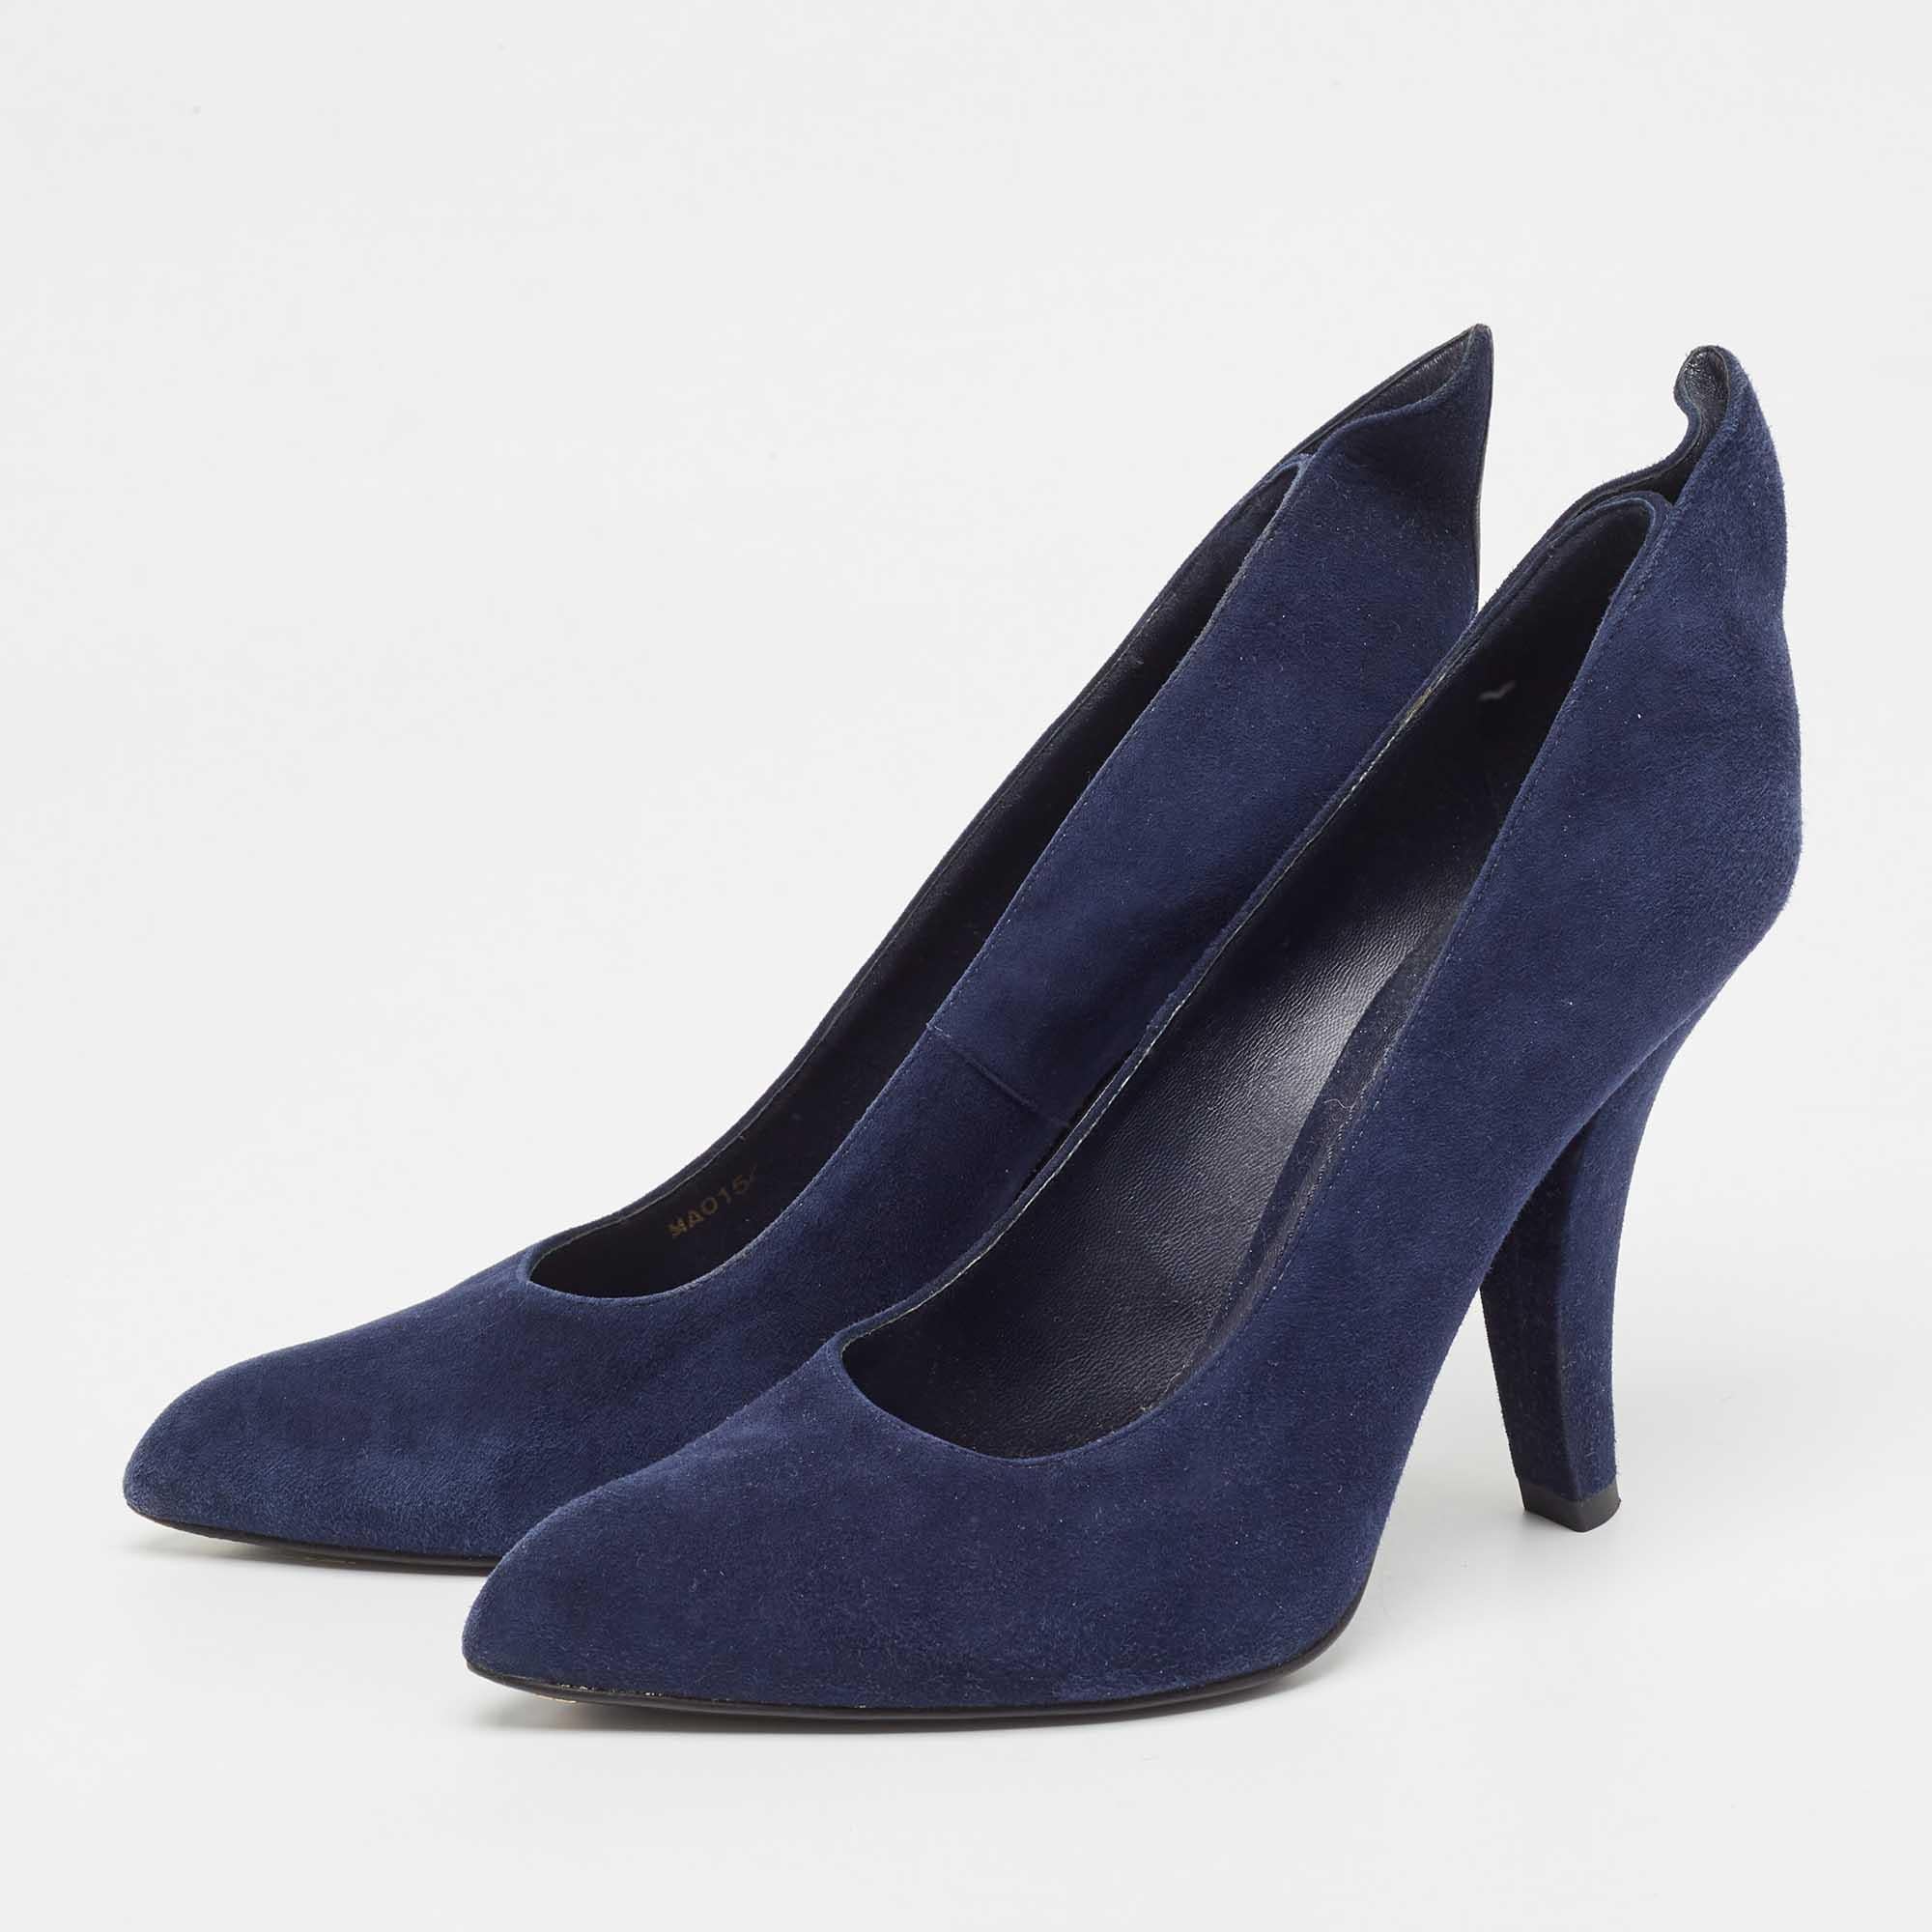 Louis Vuitton Navy Blue Suede Pointed Toe Pumps Size 37 For Sale 4